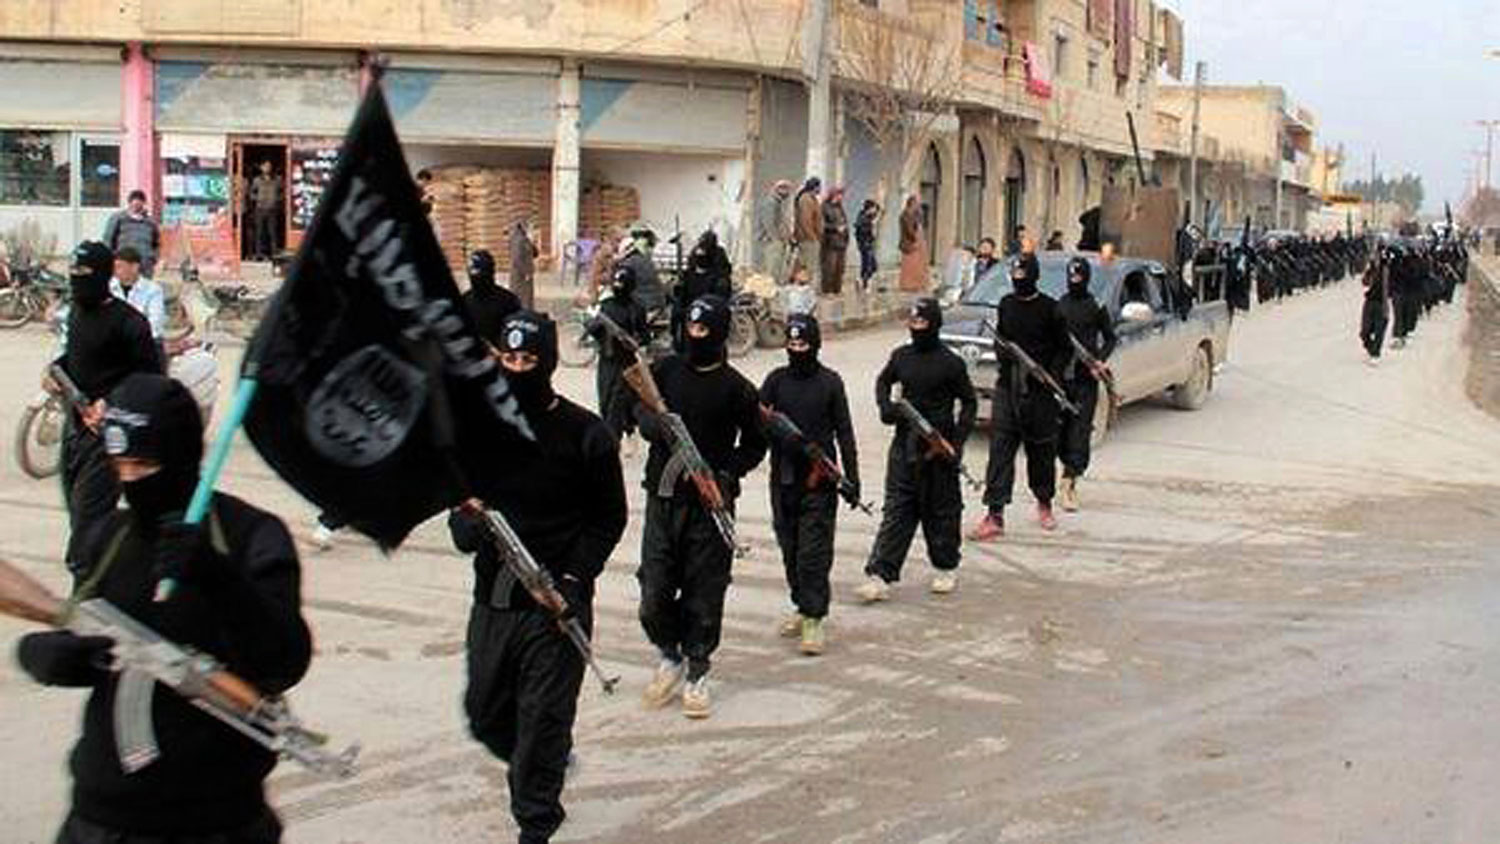 Fighters from the Islamic State of Iraq and Greater Syria marching in Raqqa, Syria, on Jan. 14, 2014 (AP)